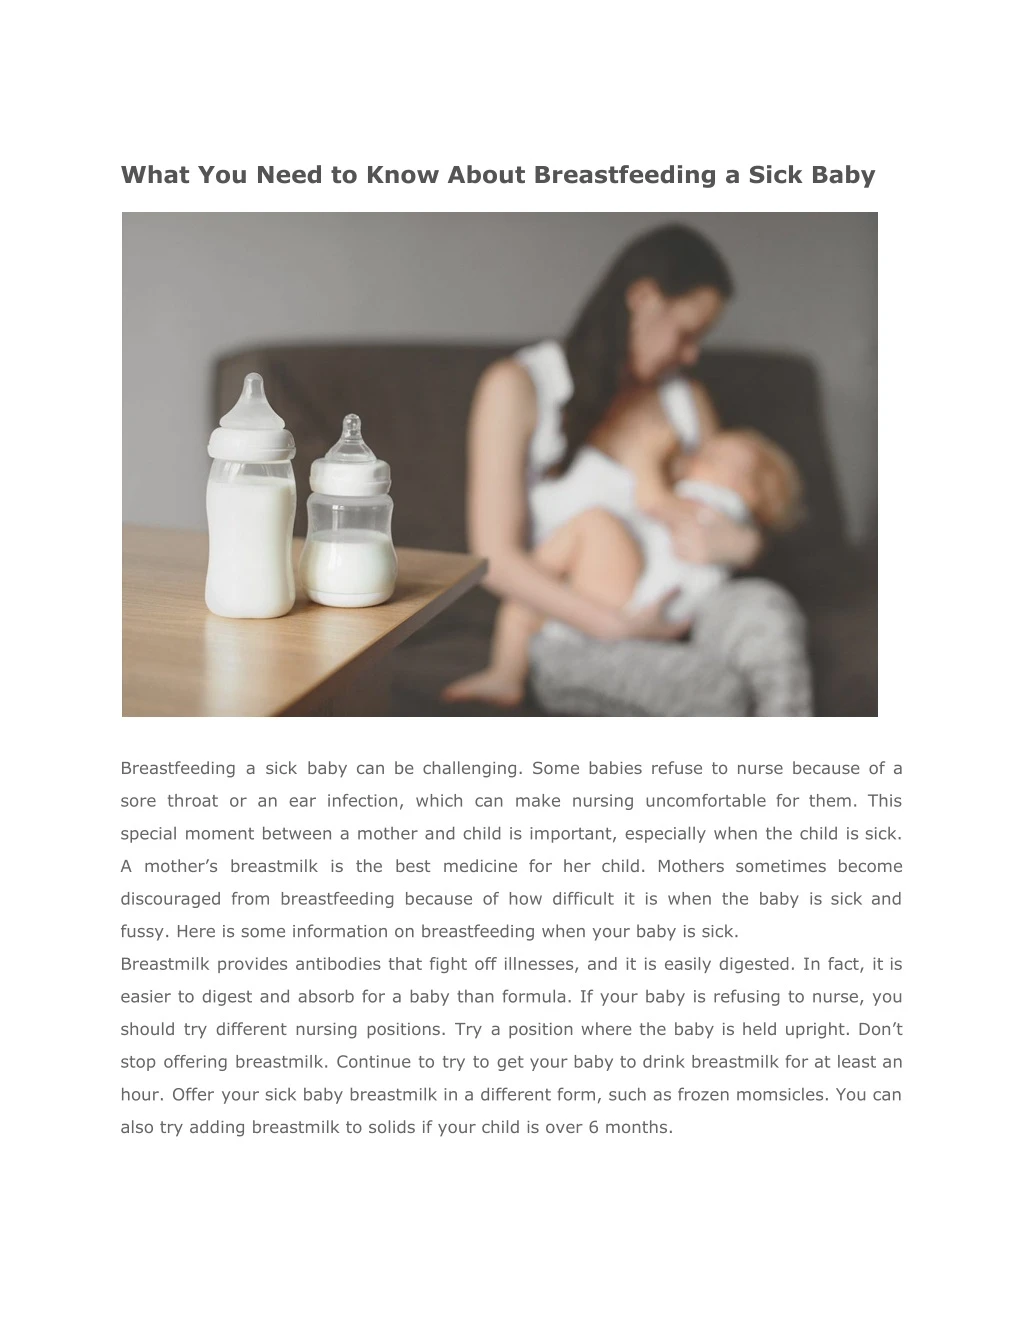 what you need to know about breastfeeding a sick